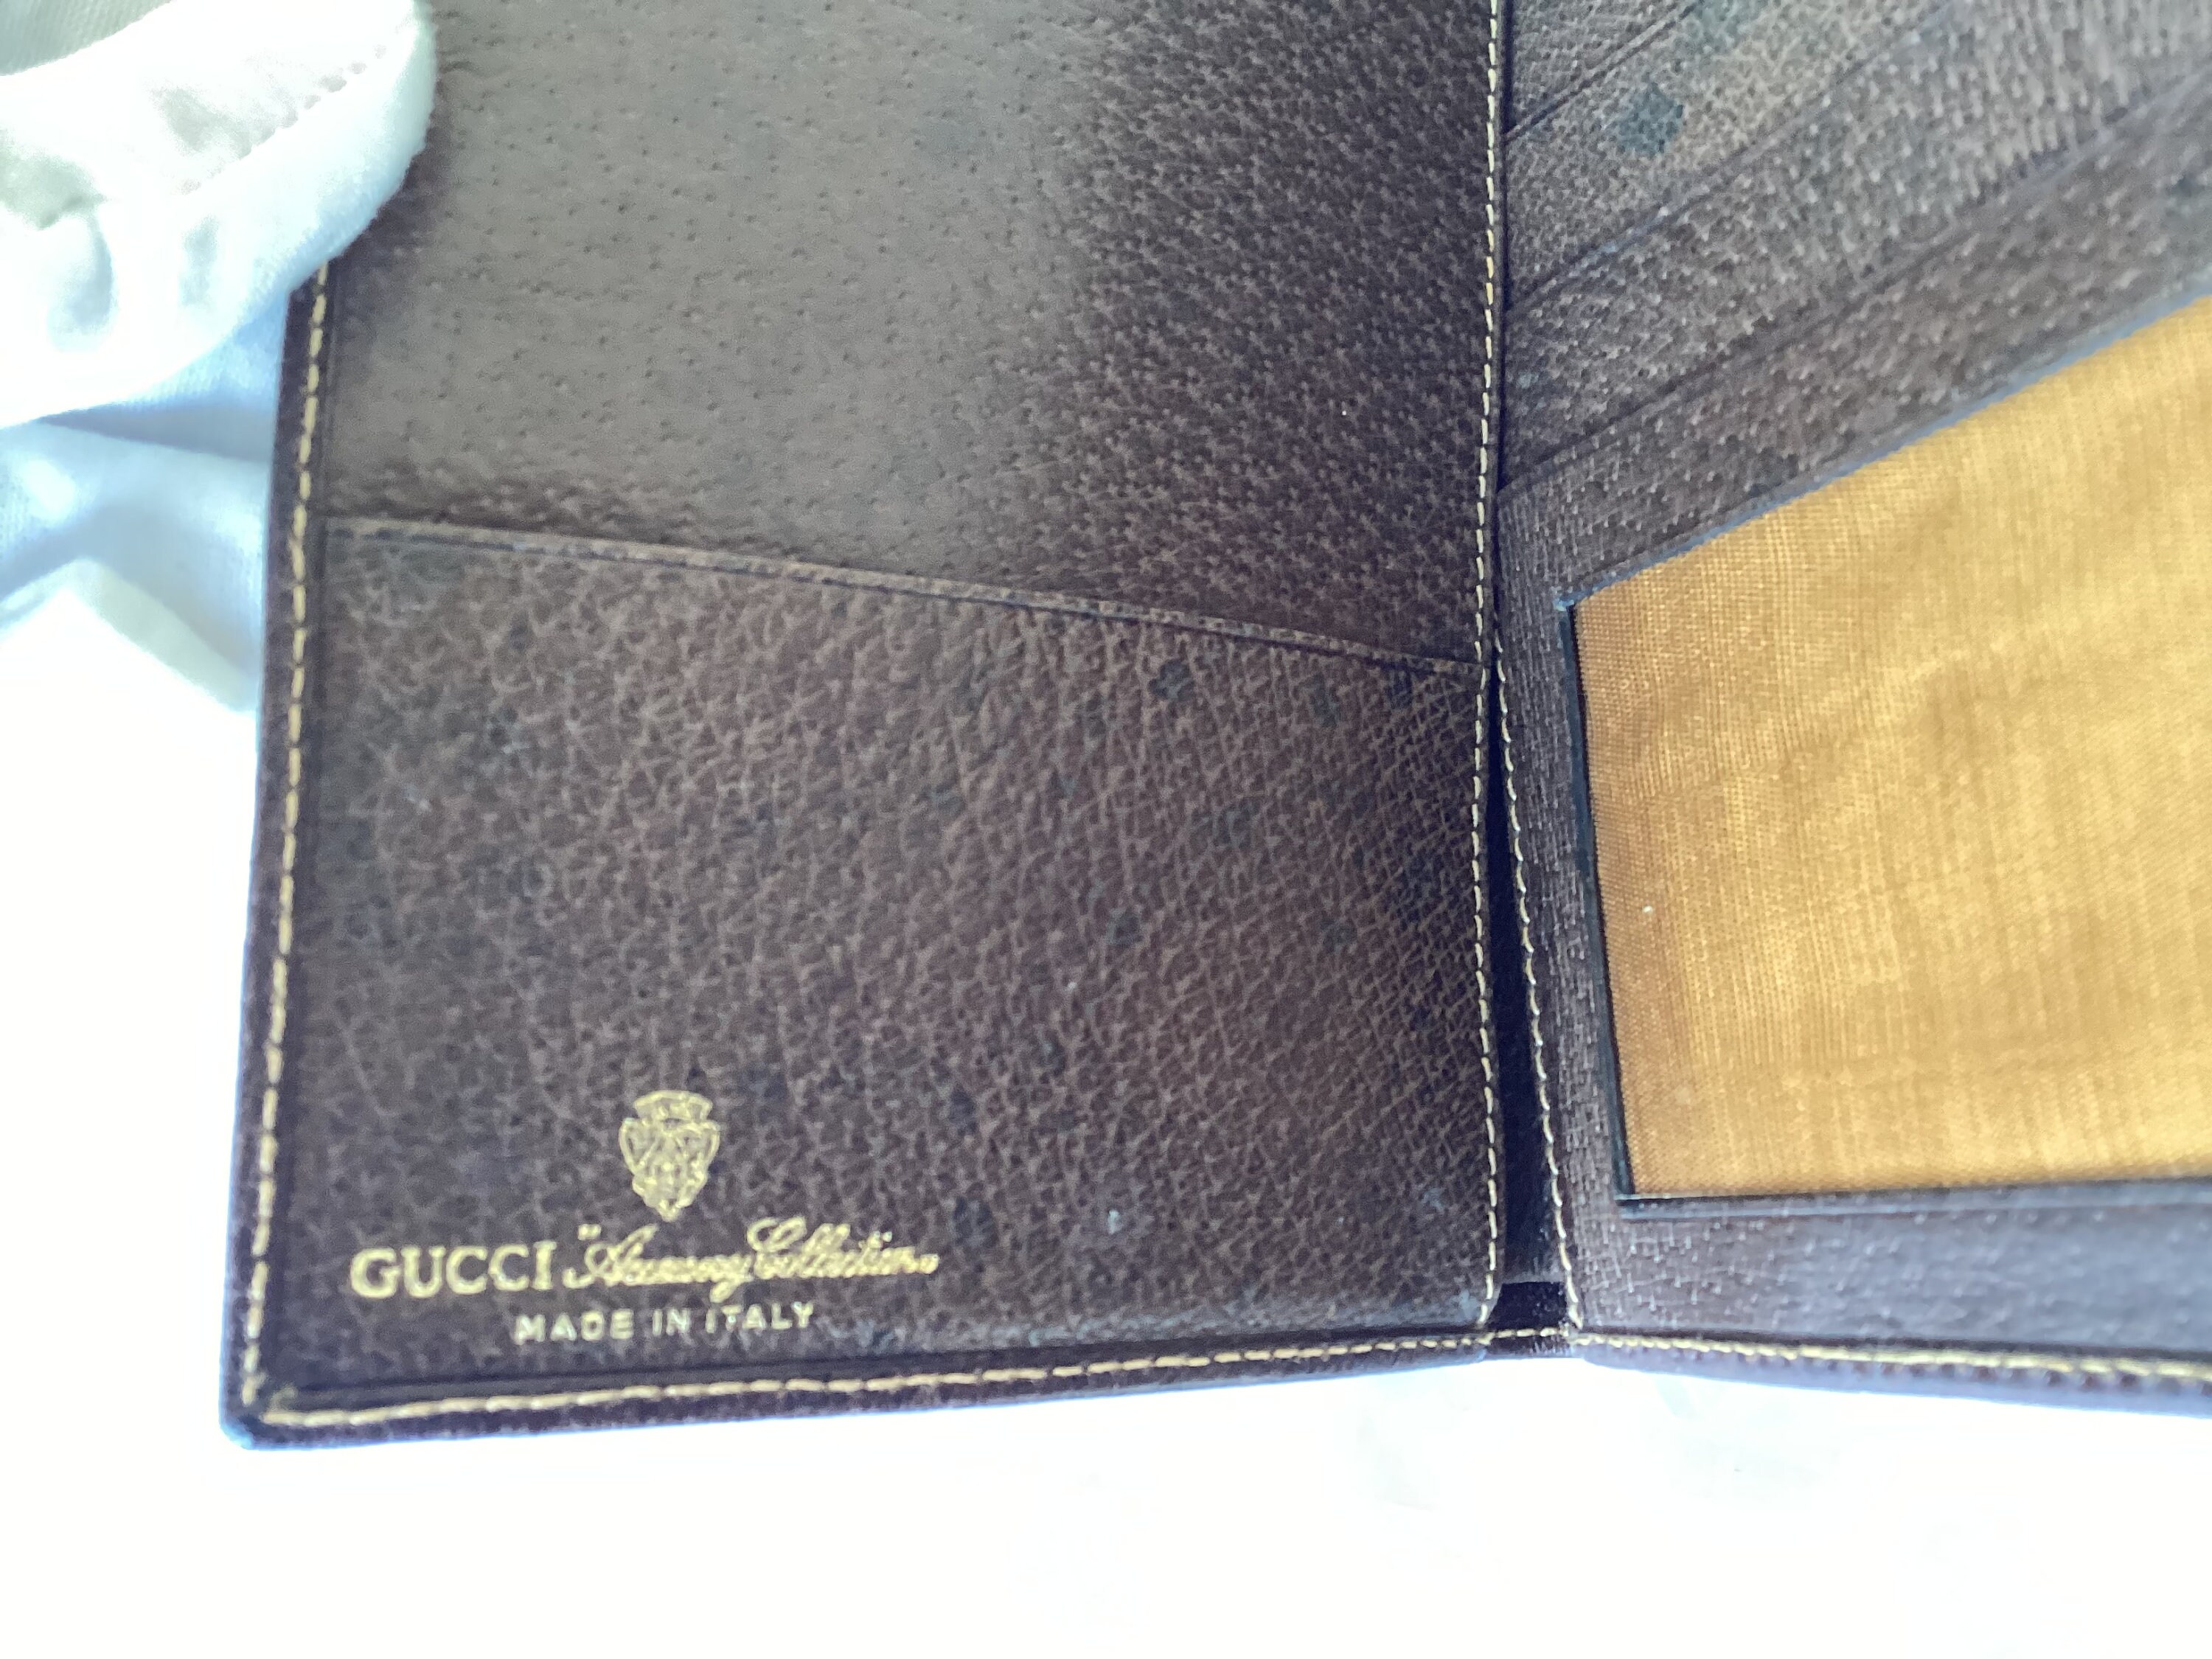 Gucci shima notebook cover Leather Brown Passport cover wallet Authentic